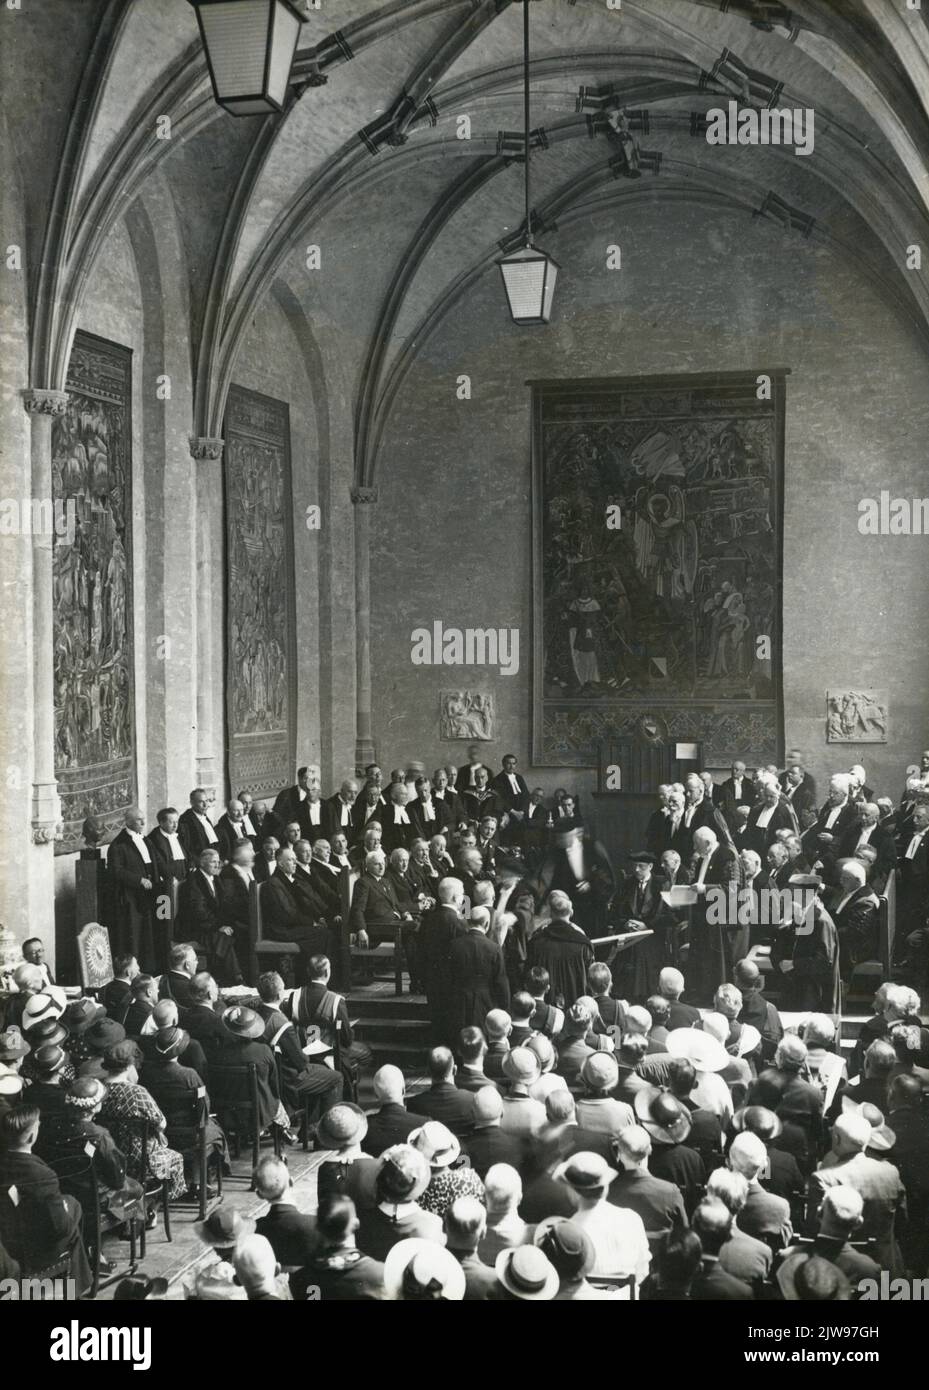 Image of the public session of the Academic Senate, in the Groot Auditorium of the Academy Building (Domplein 29) in Utrecht, during the presentation of 38 honorary doctorates, including to the Dutch. H. Kraemer, F.H. Fentener van Vlissingen, J.G. Remijnse, Prof.dr. P.C. Flu, C.A. Backer, Dom Jac. Huyben O.S.B., Dr. A. Vrijburg, Prof.dr. L. Otten, on the occasion of the 60th anniversary (300th anniversary) of the Utrecht University. Stock Photo